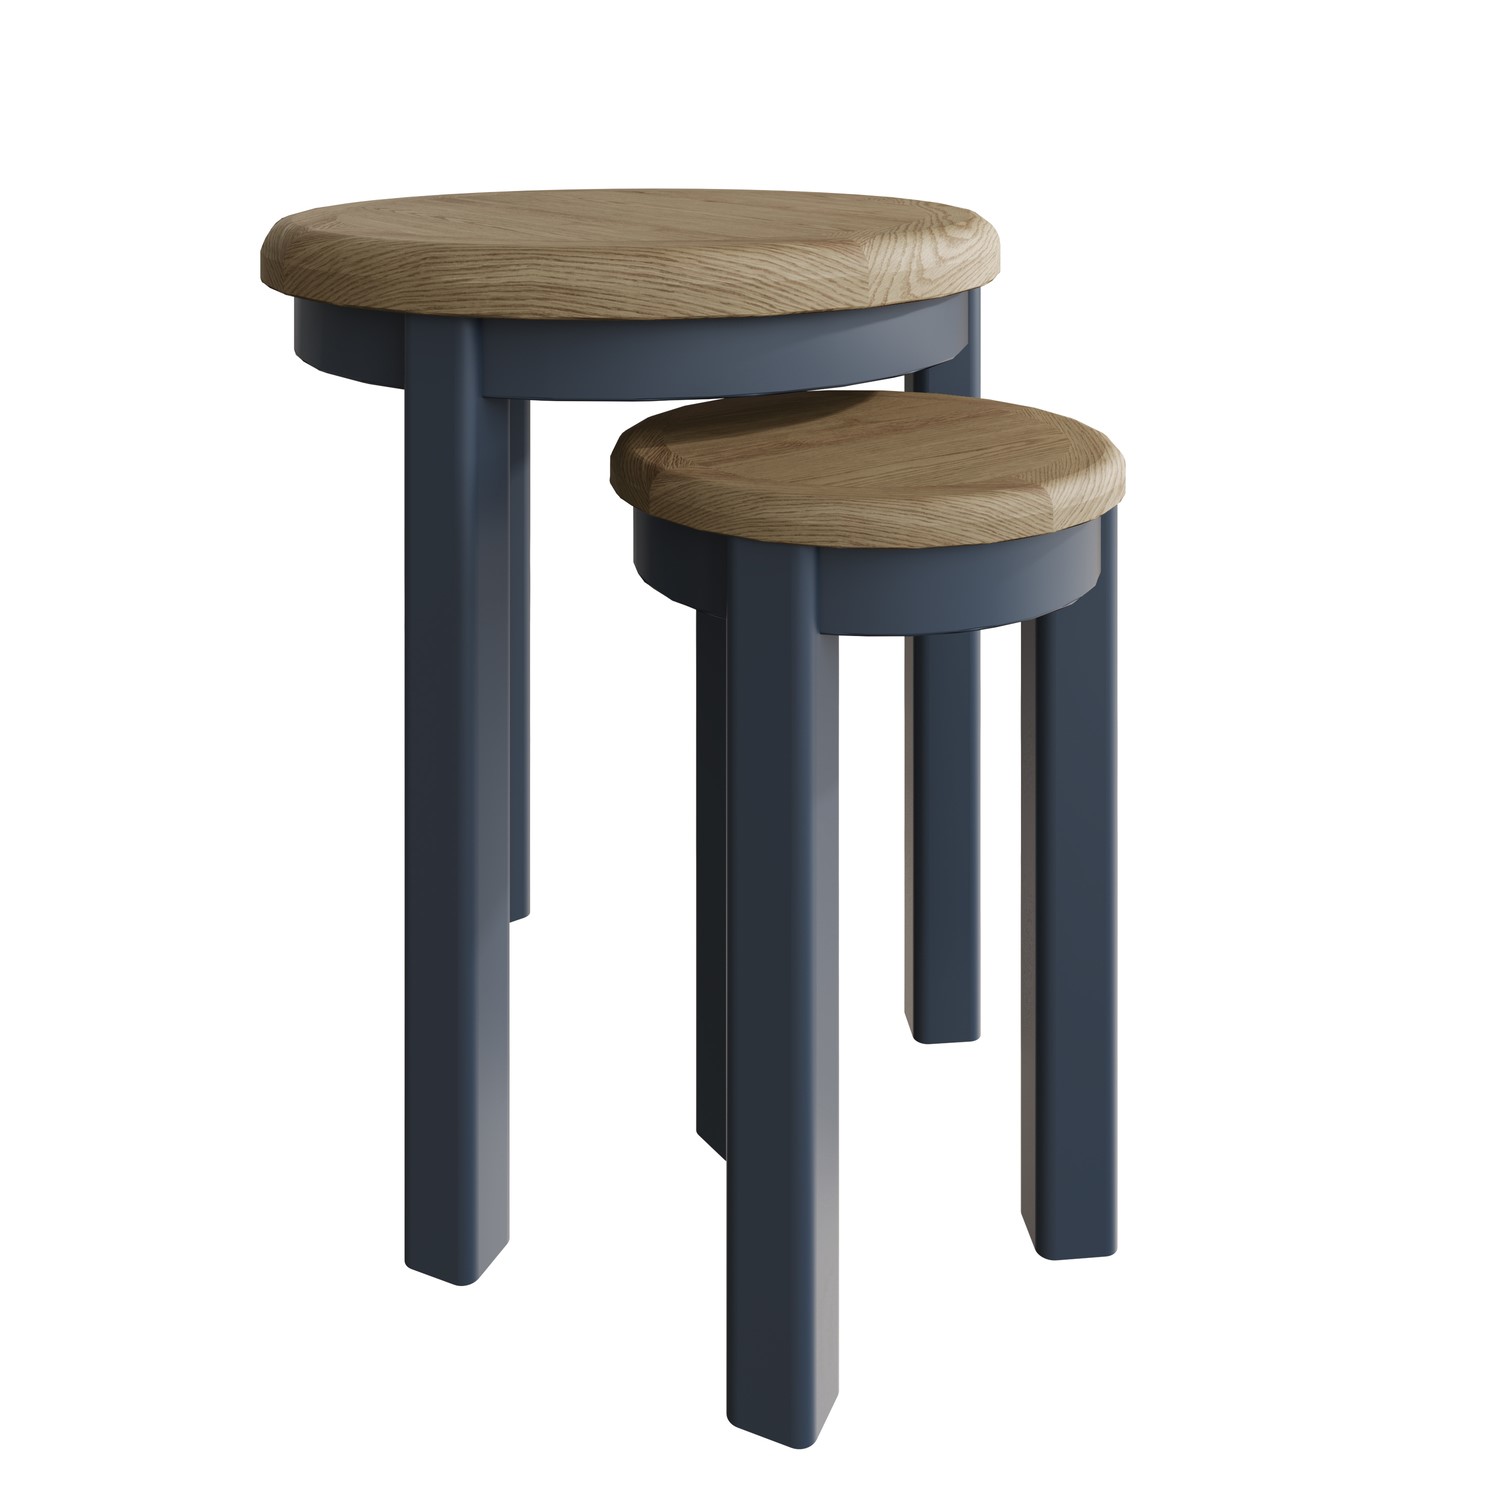 Read more about Oak & blue round nest of 2 tables